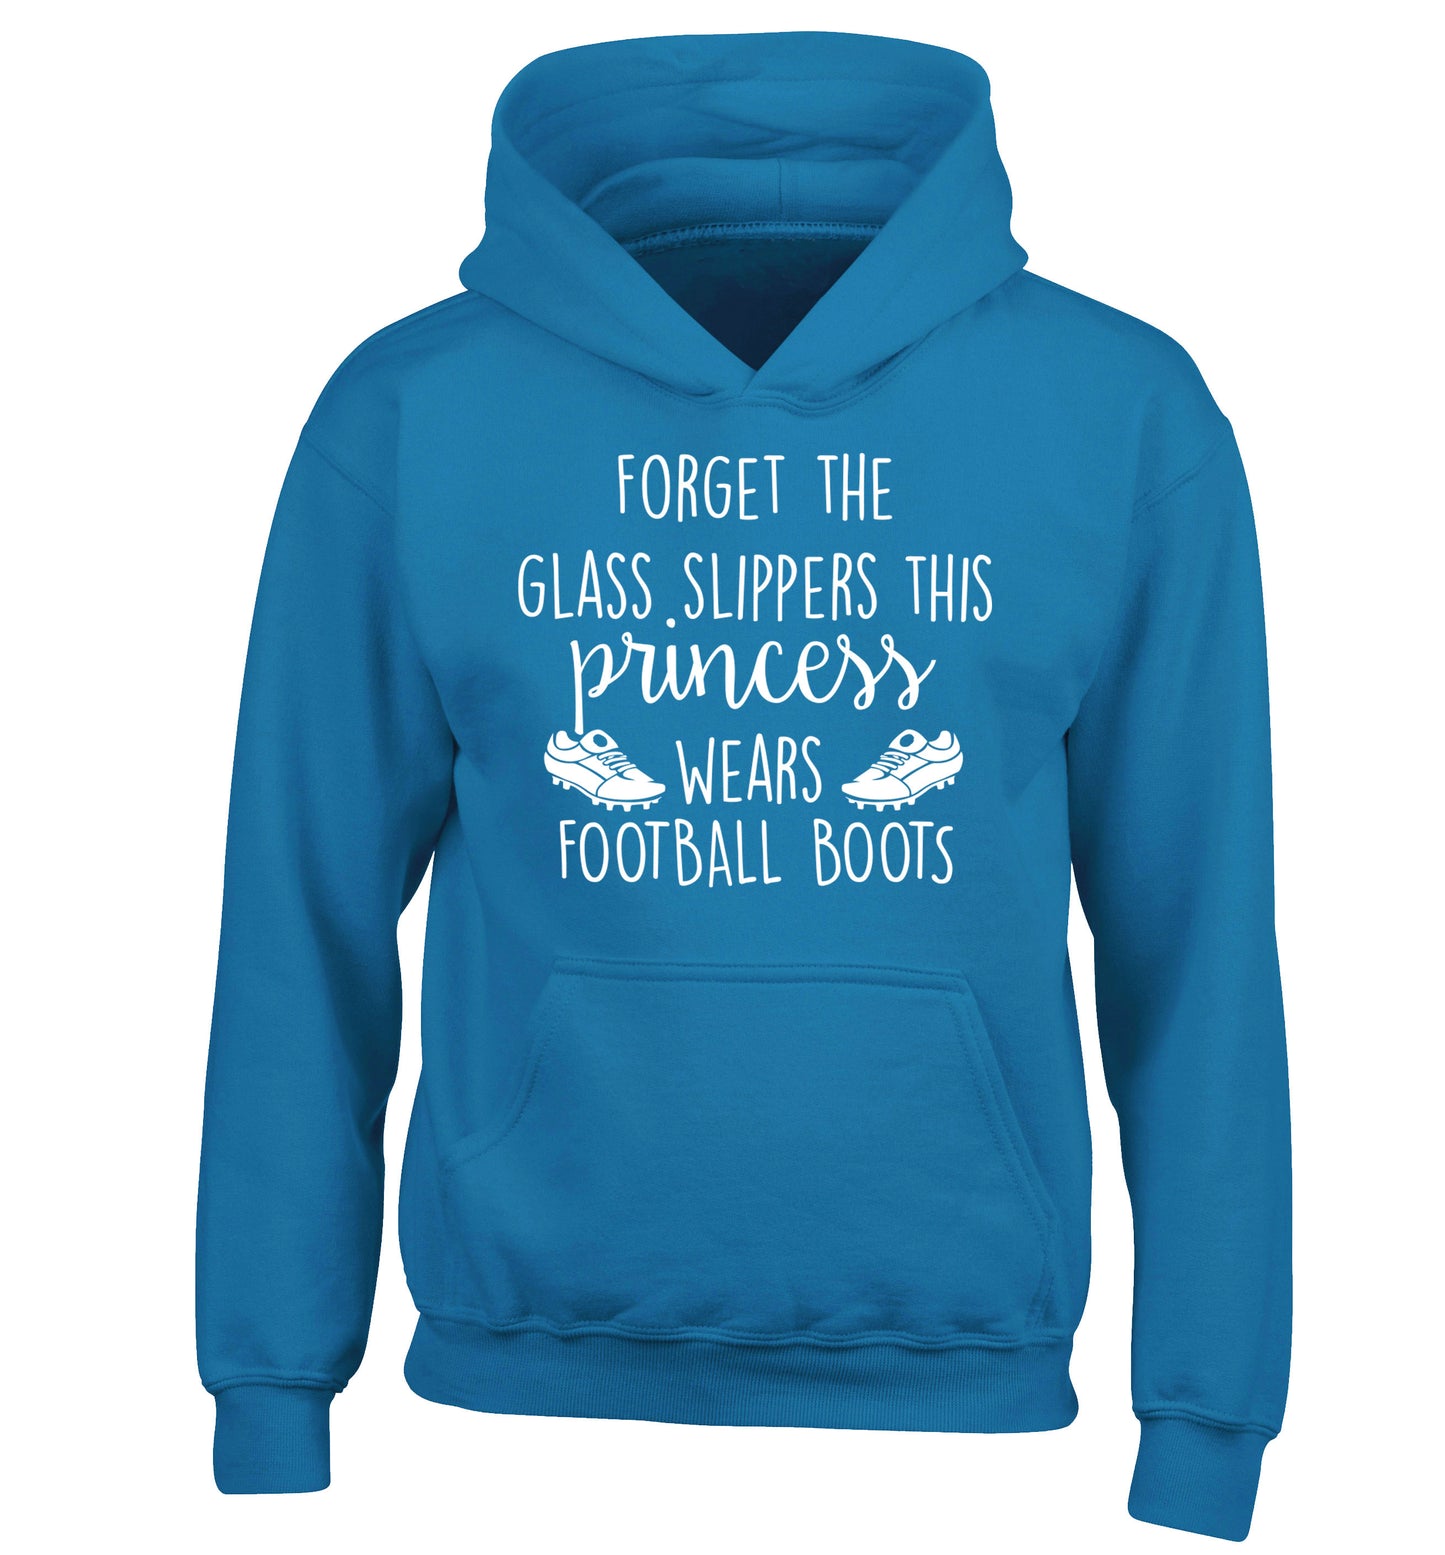 Forget the glass slippers this princess wears football boots children's blue hoodie 12-14 Years